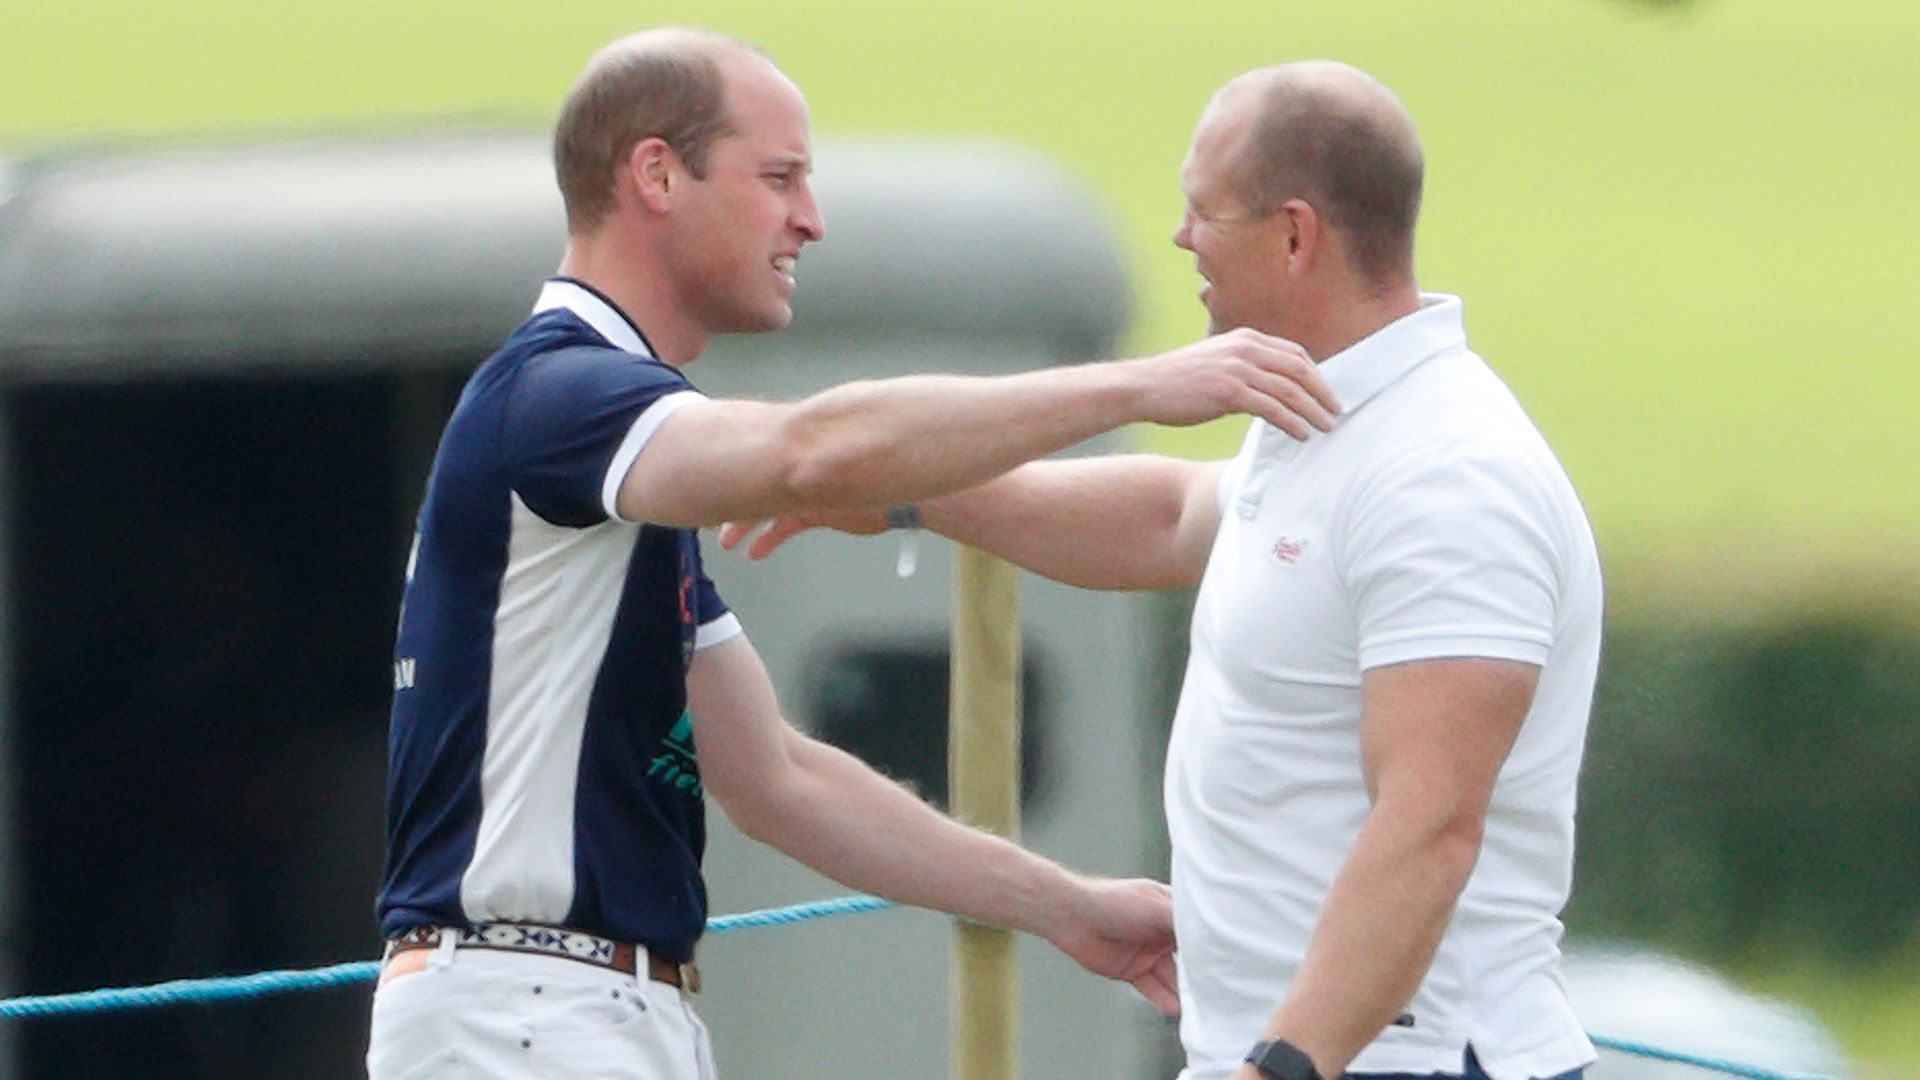 Inside the 'brotherly' friendship between Prince William and Mike Tindall